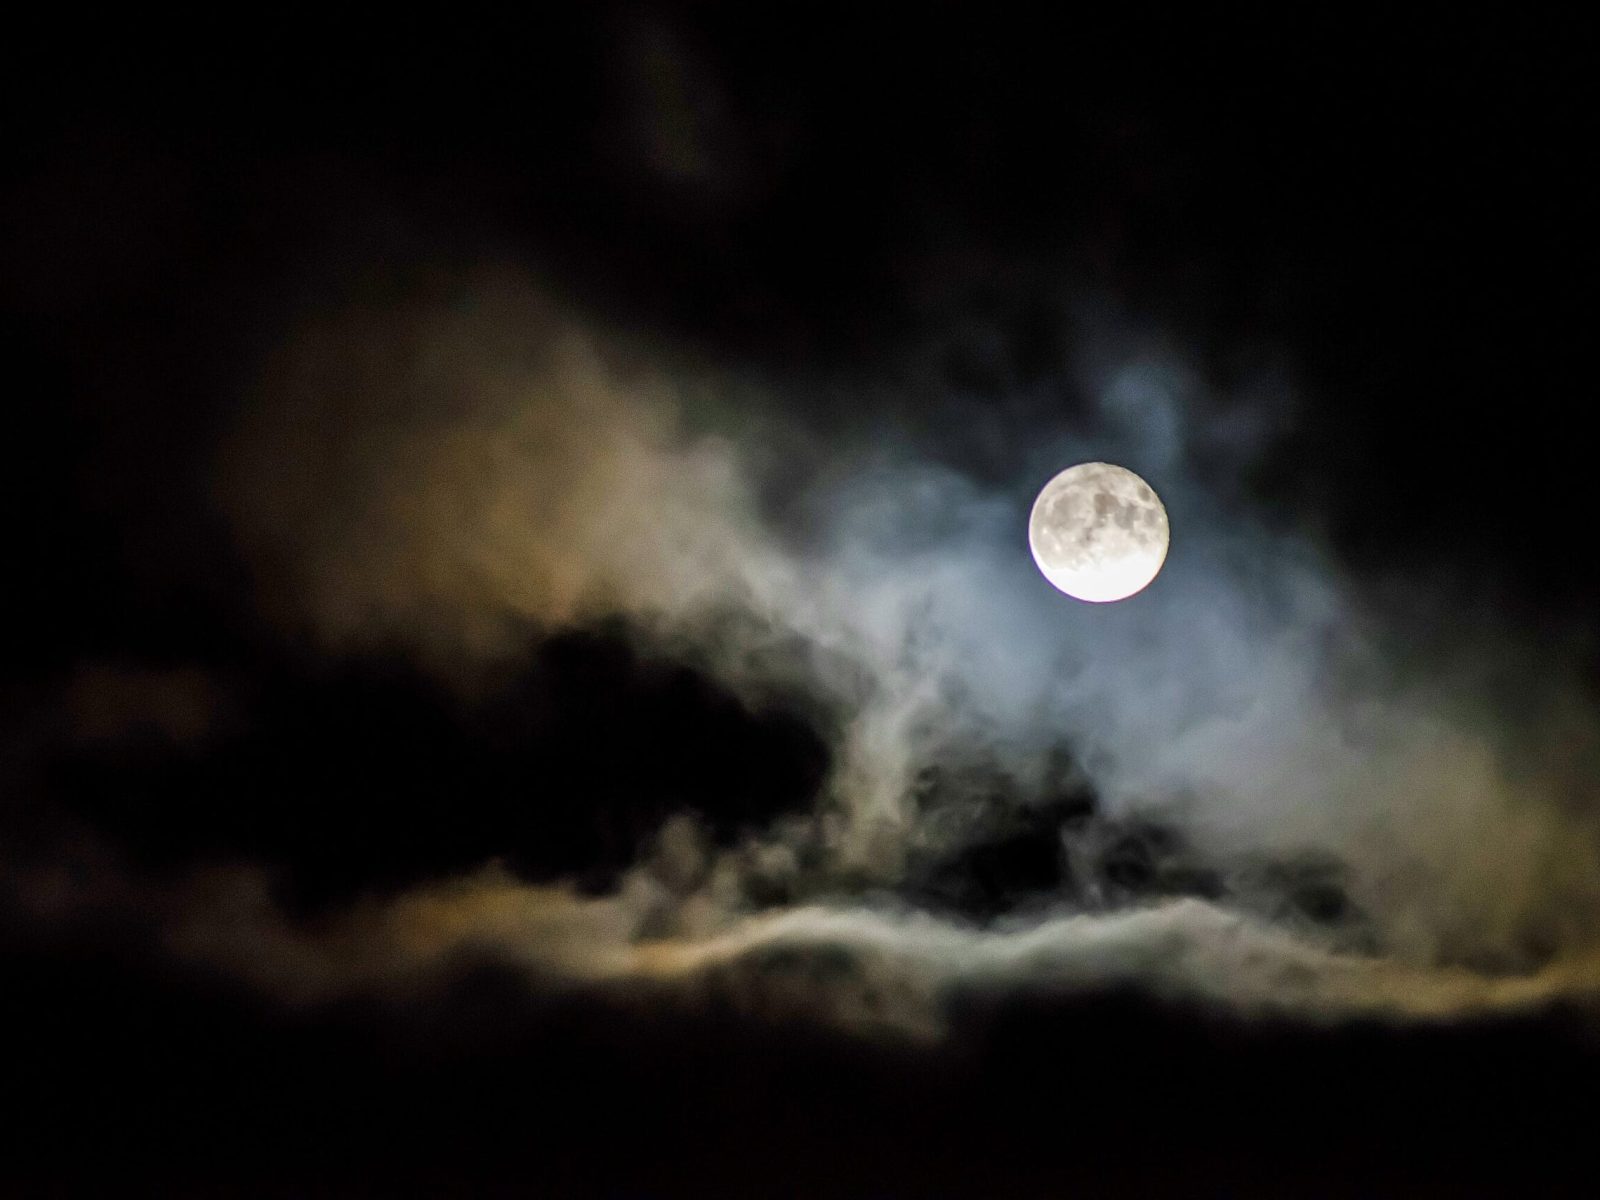 An eerie scene of the moon veiled by ominous clouds in the dark night sky, evoking a sense of mystery and spookiness.